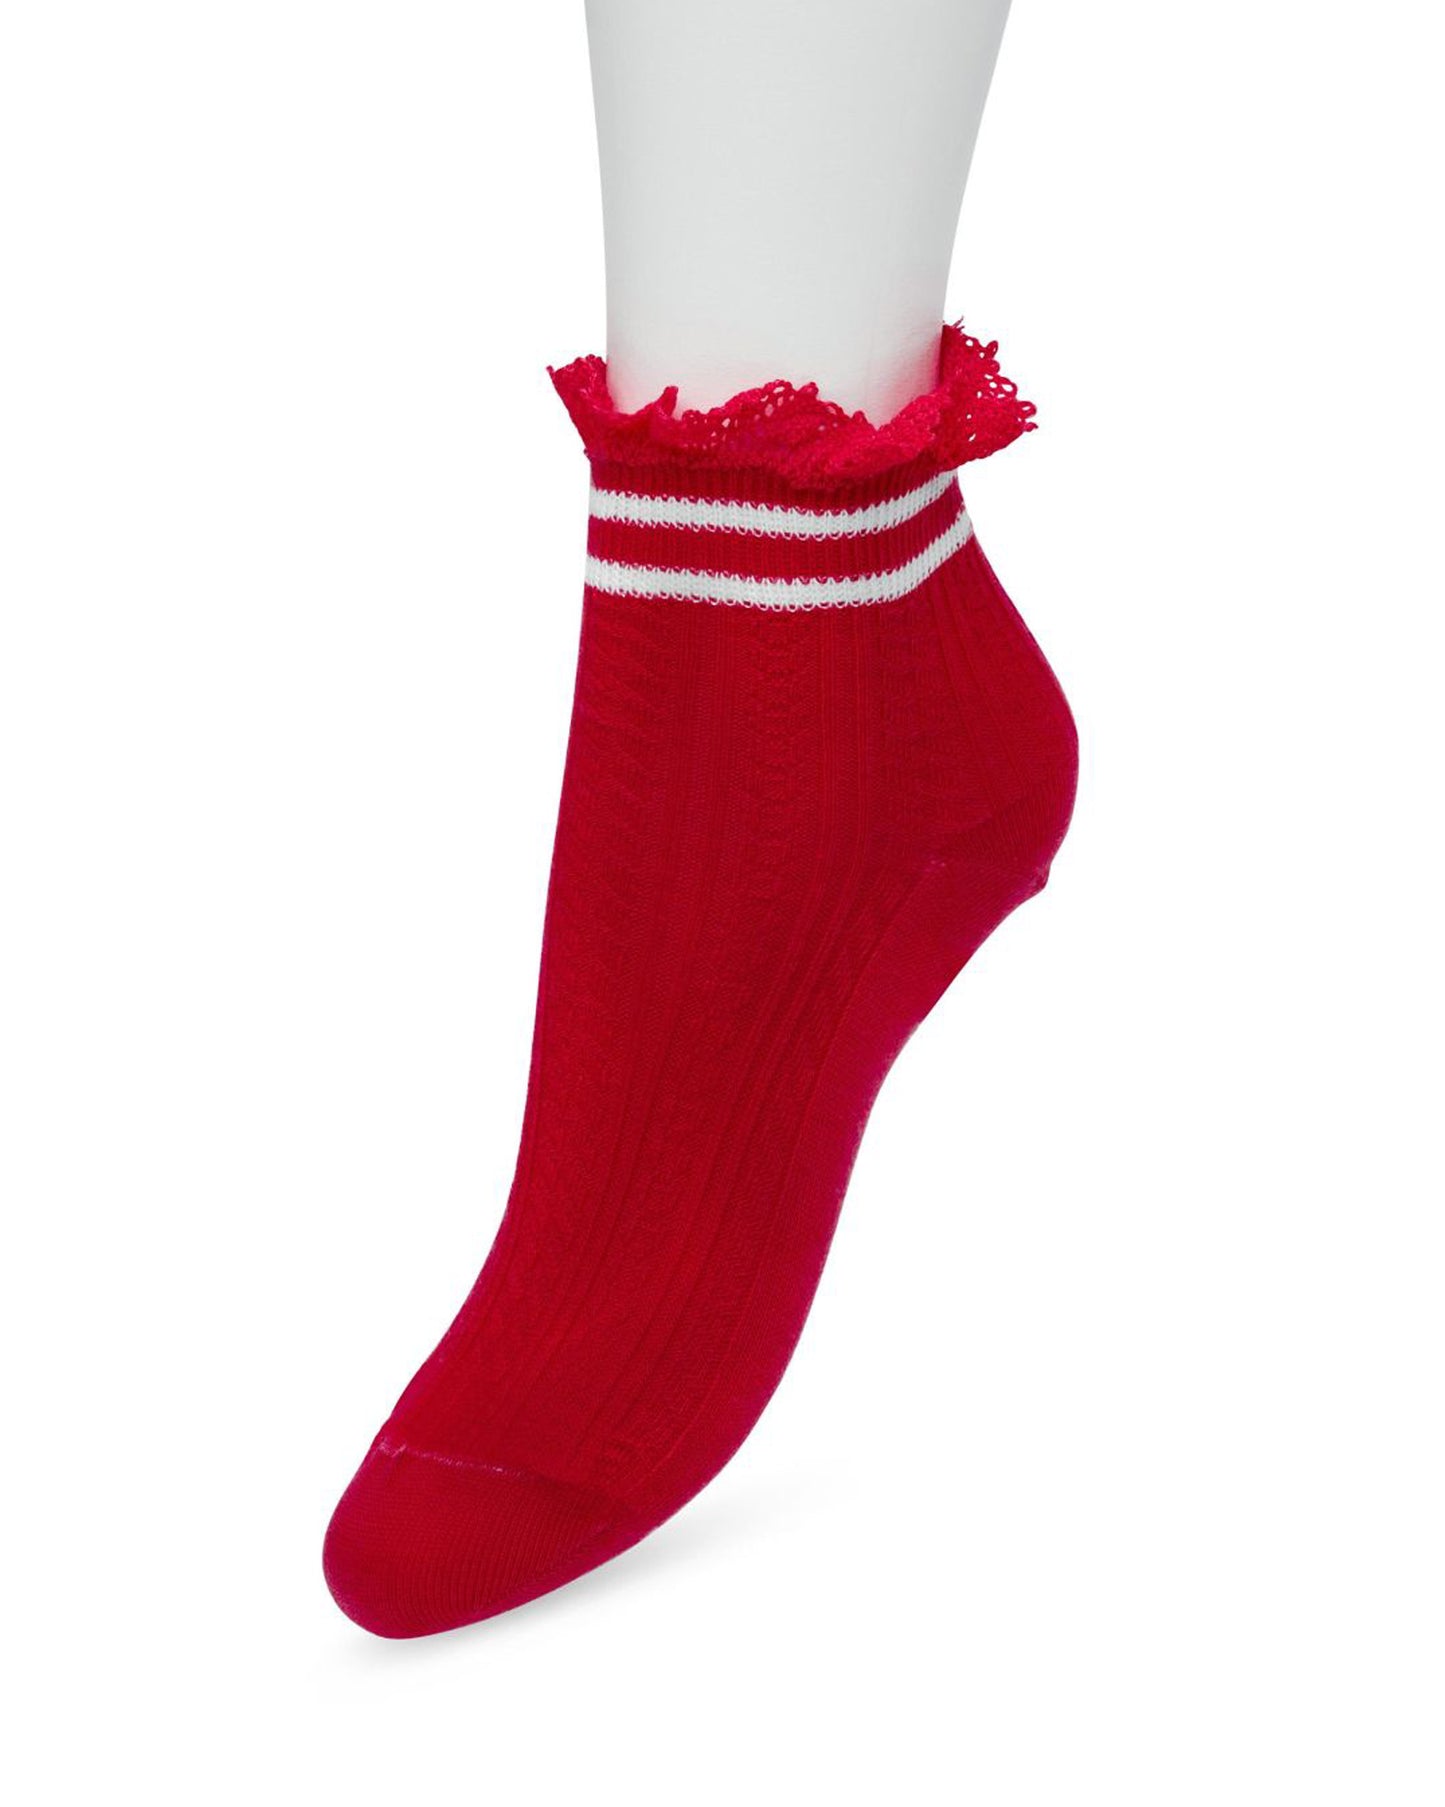 Bonnie Doon Sporty Lace Sock - Light weight red cable knitted style low ankle socks with a lace frill cuff with white double sports stripe, shaped heel and flat toe seam.